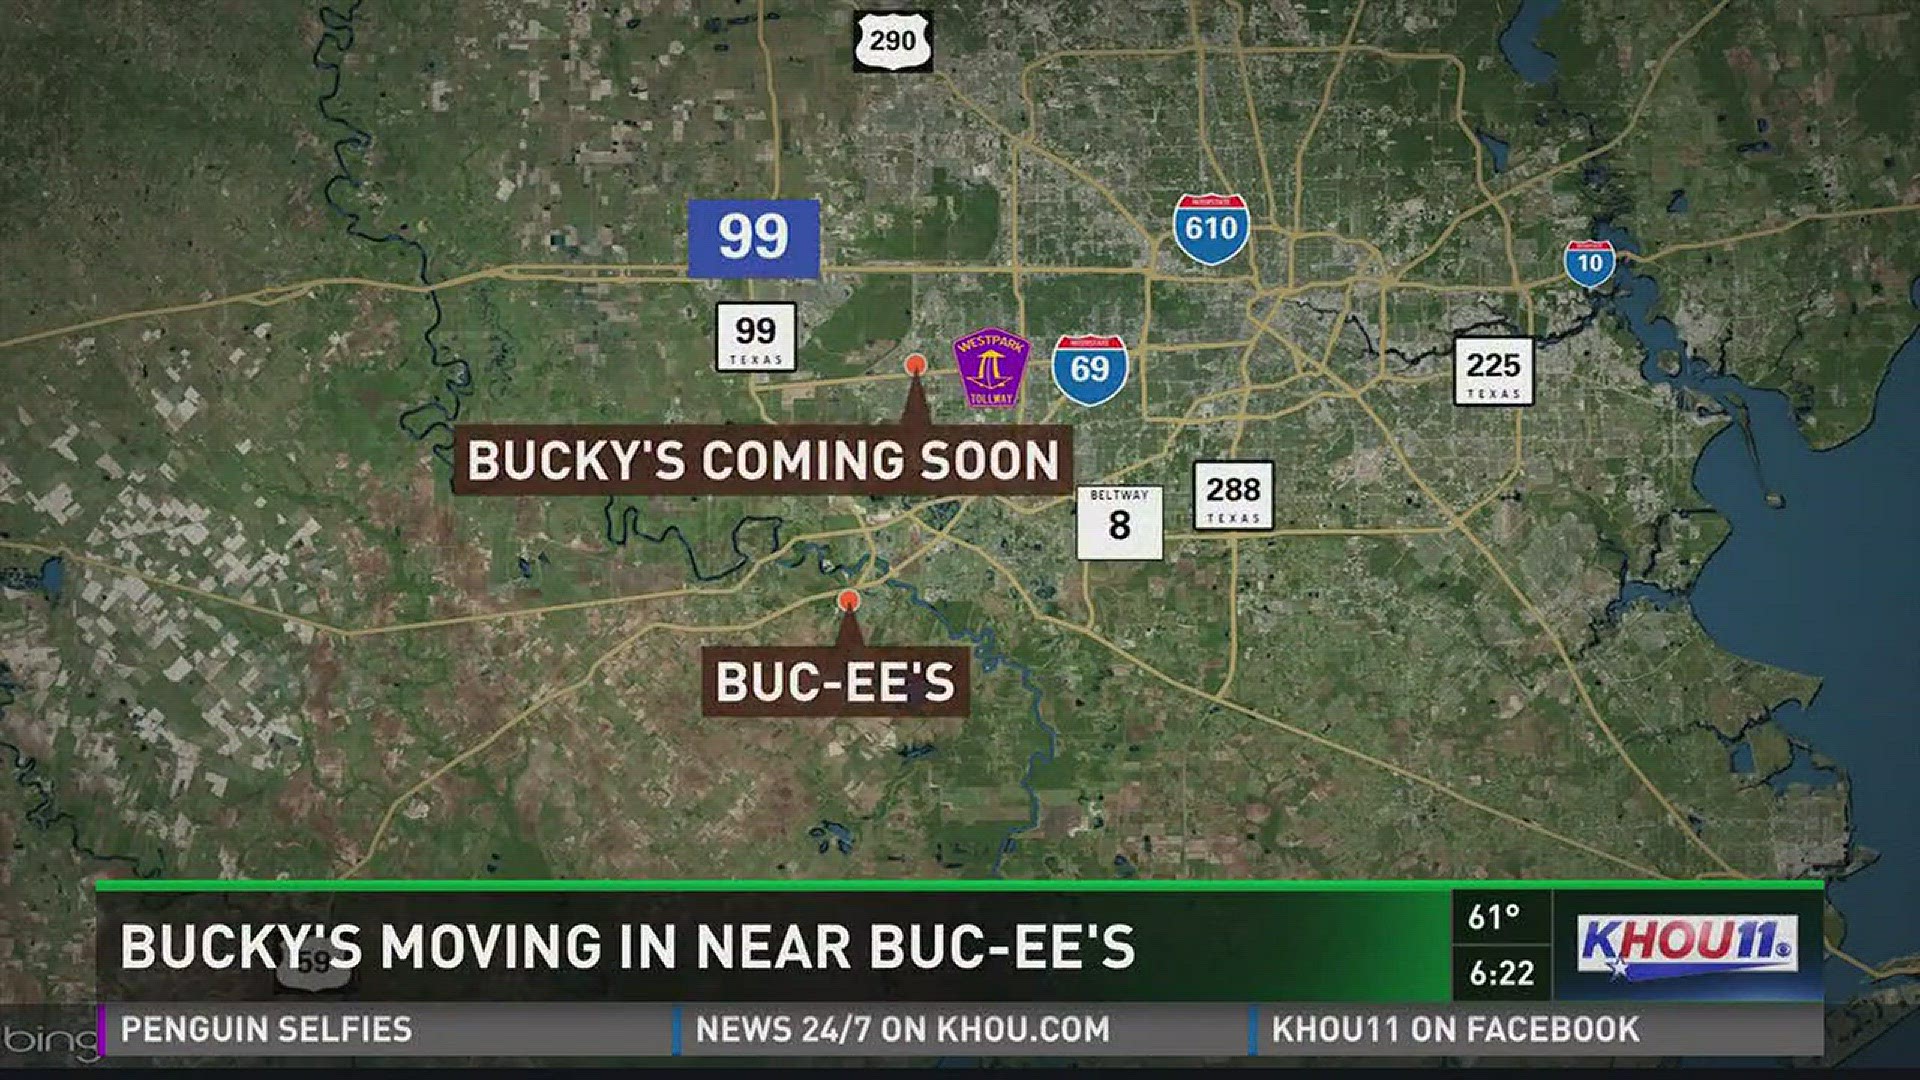 Some folks in Richmond were excited about "Bucky's" moving into their neighborhood, but it's not what they were expecting.